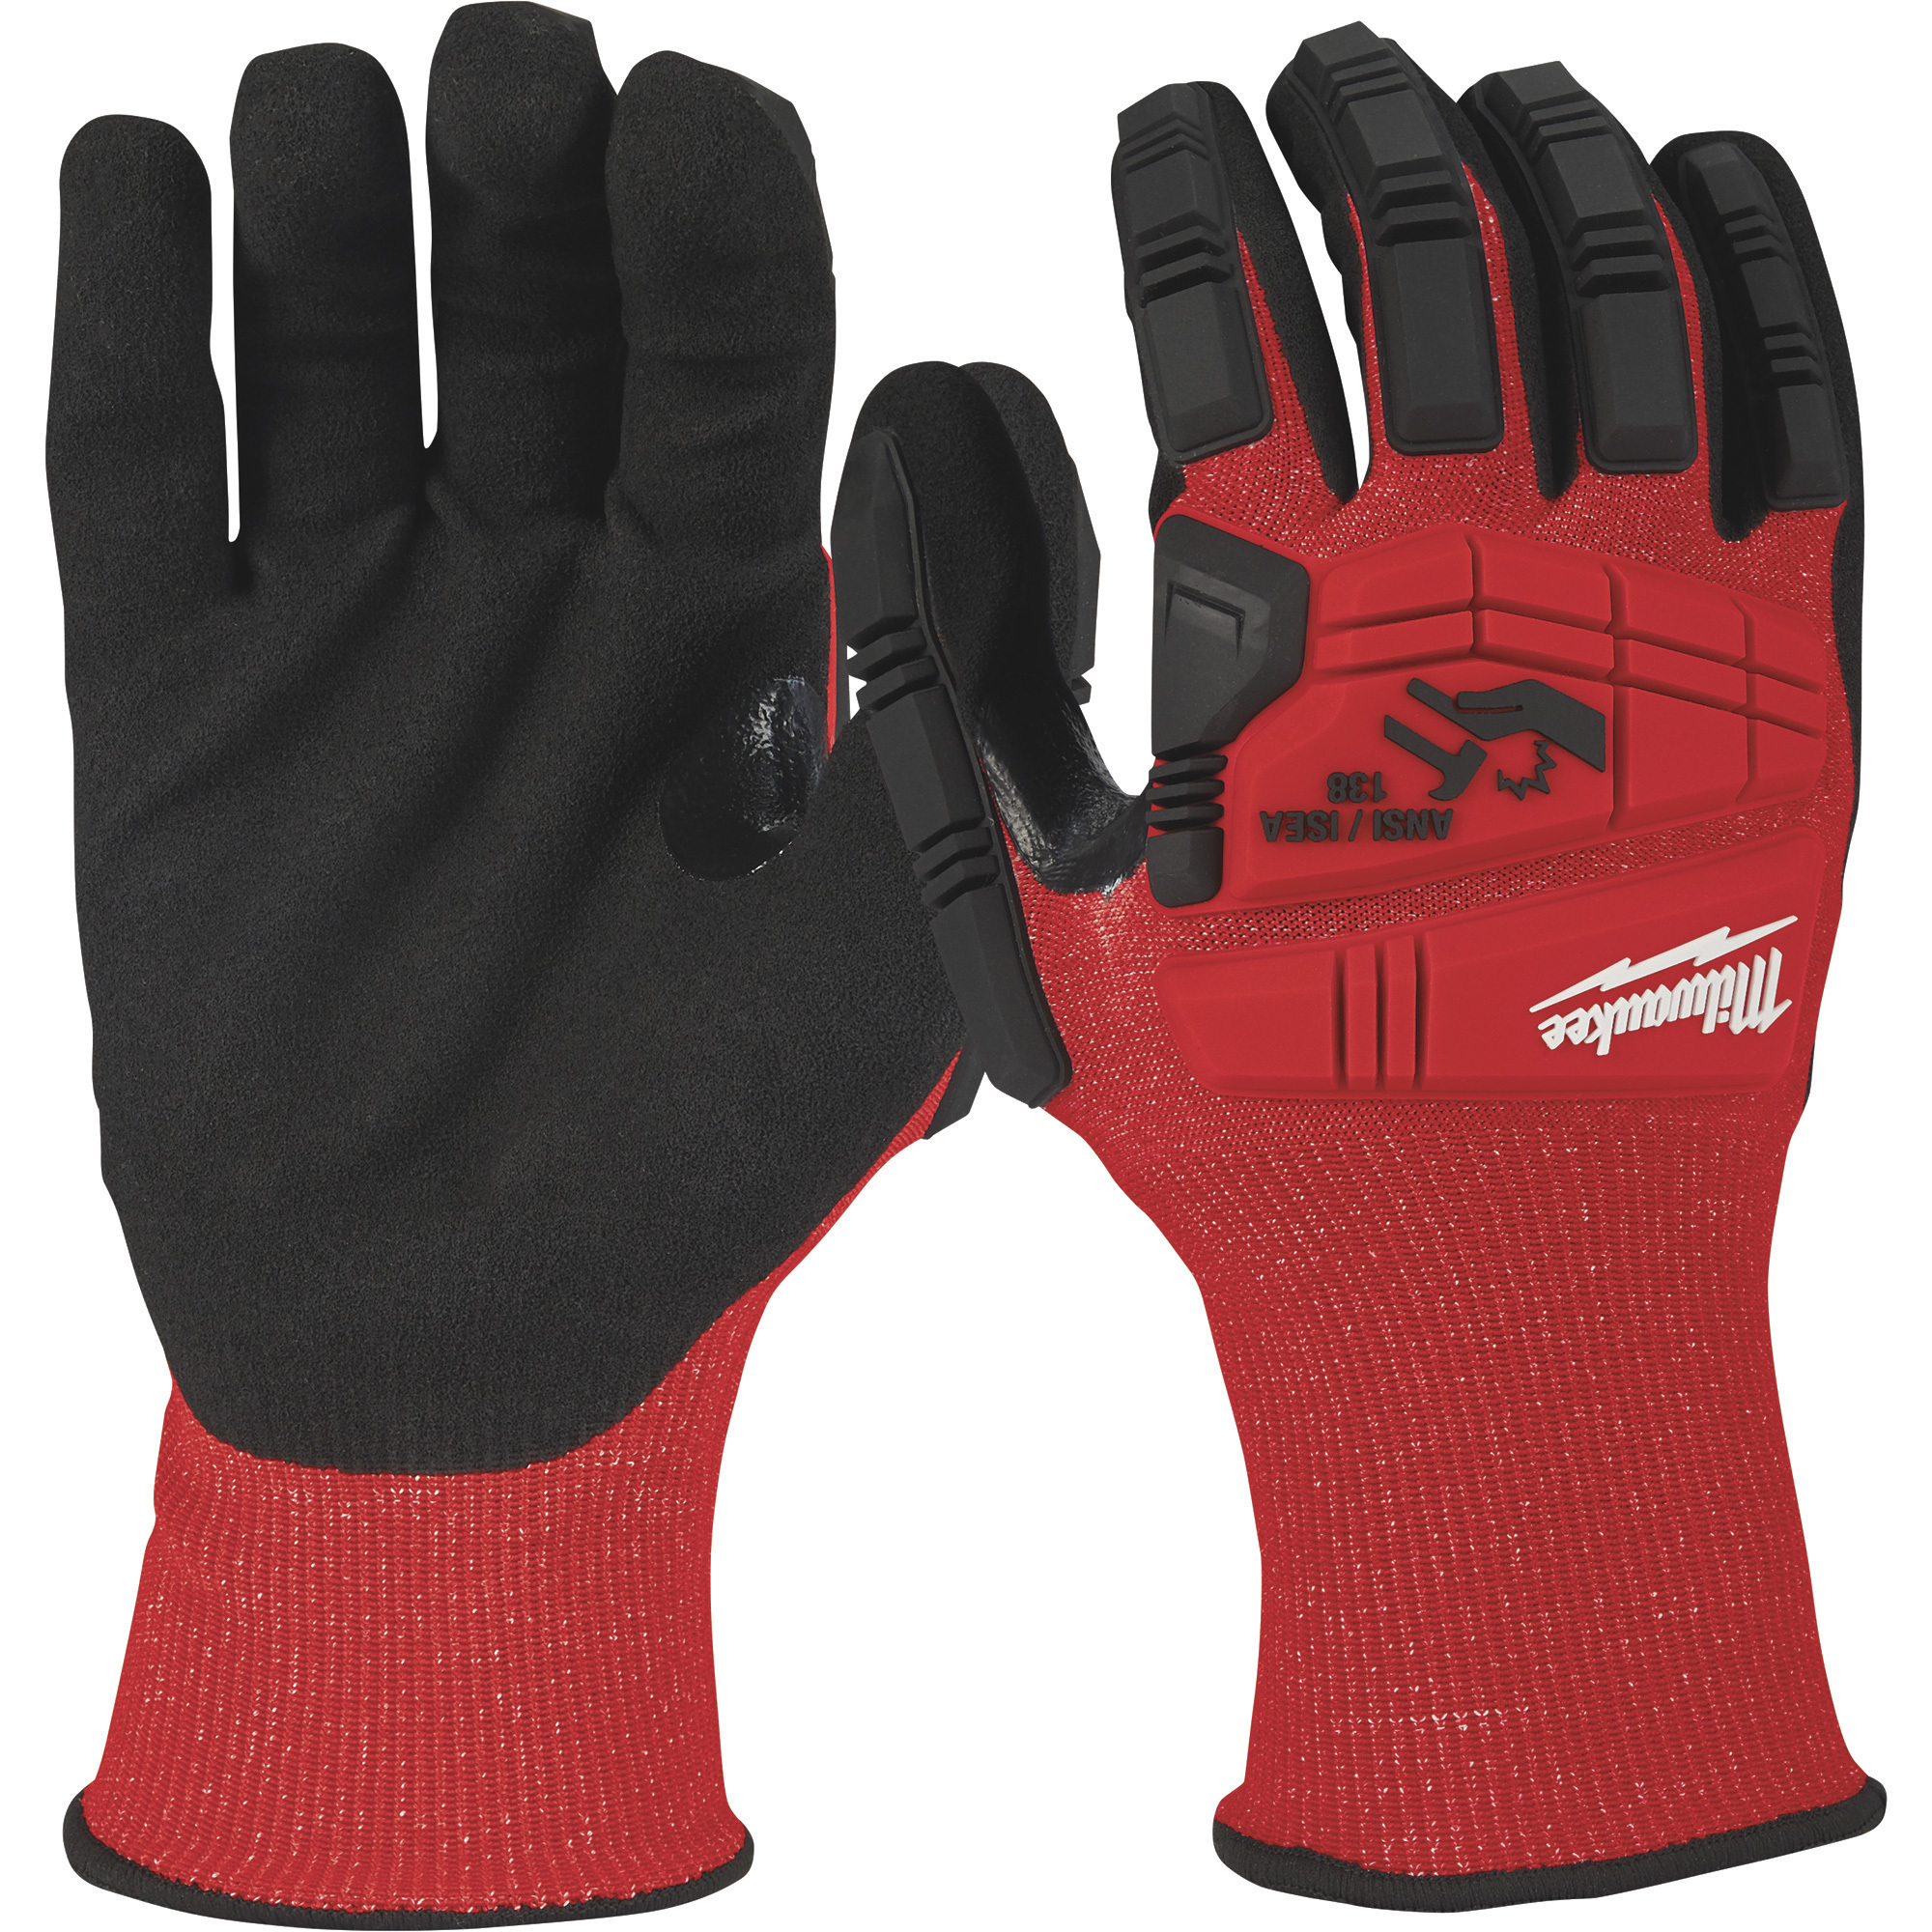 Milwaukee Impact Cut-Resistant Level 3 Nitrile Gloves, 1 Pair, Red/Black, Large, Model 48-22-8972